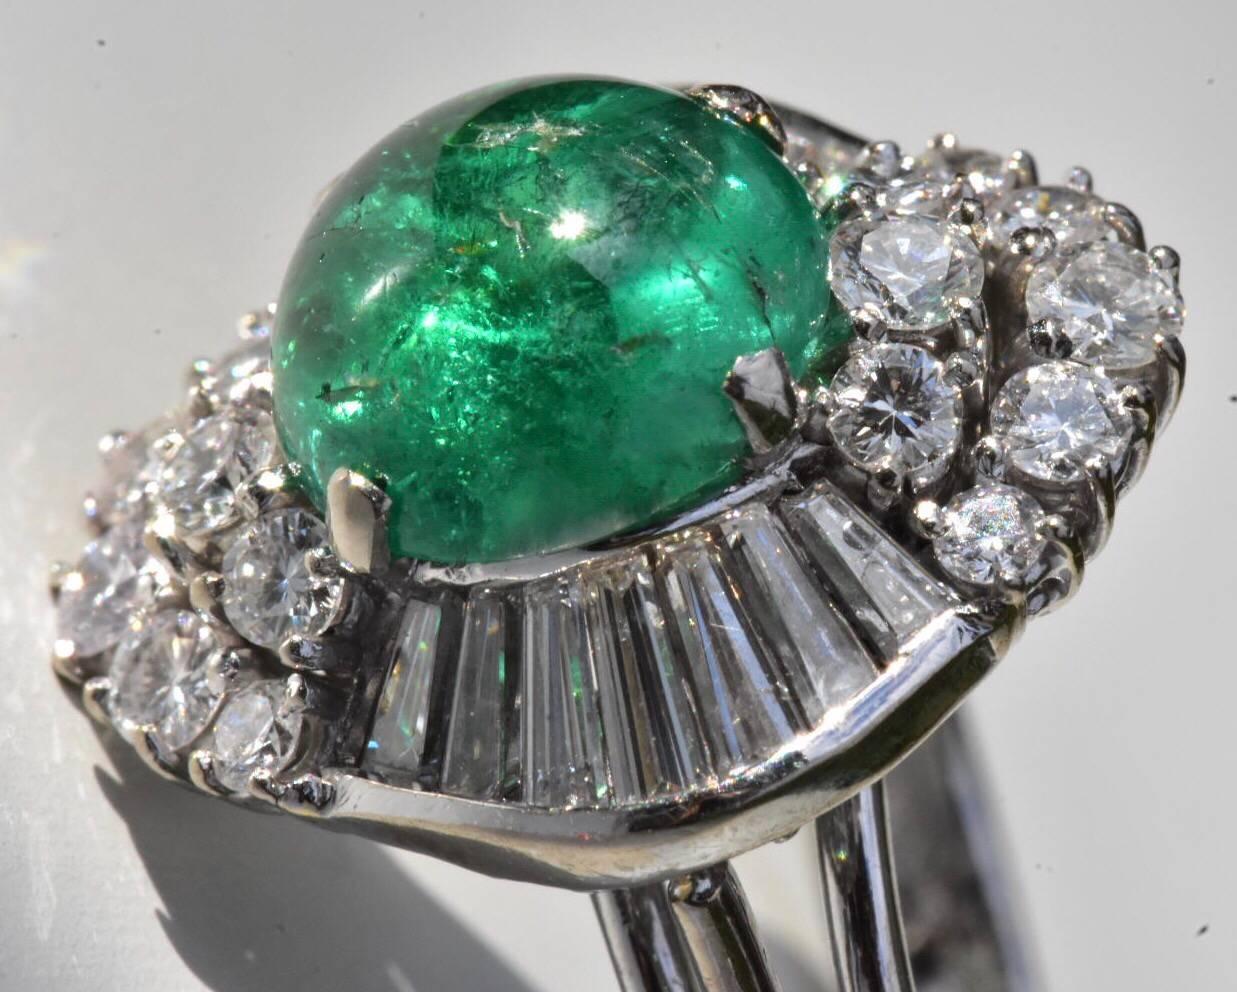 A fine Emerald and diamond ring set in 14k white gold. The ring features a cabochon emerald of approx 2.50 carat with trapeze and round brilliant-cut diamonds of approx 1.35 carat set to a plain 14k white gold band. 
Hallmarks: 585
Size: UK L 1/2,